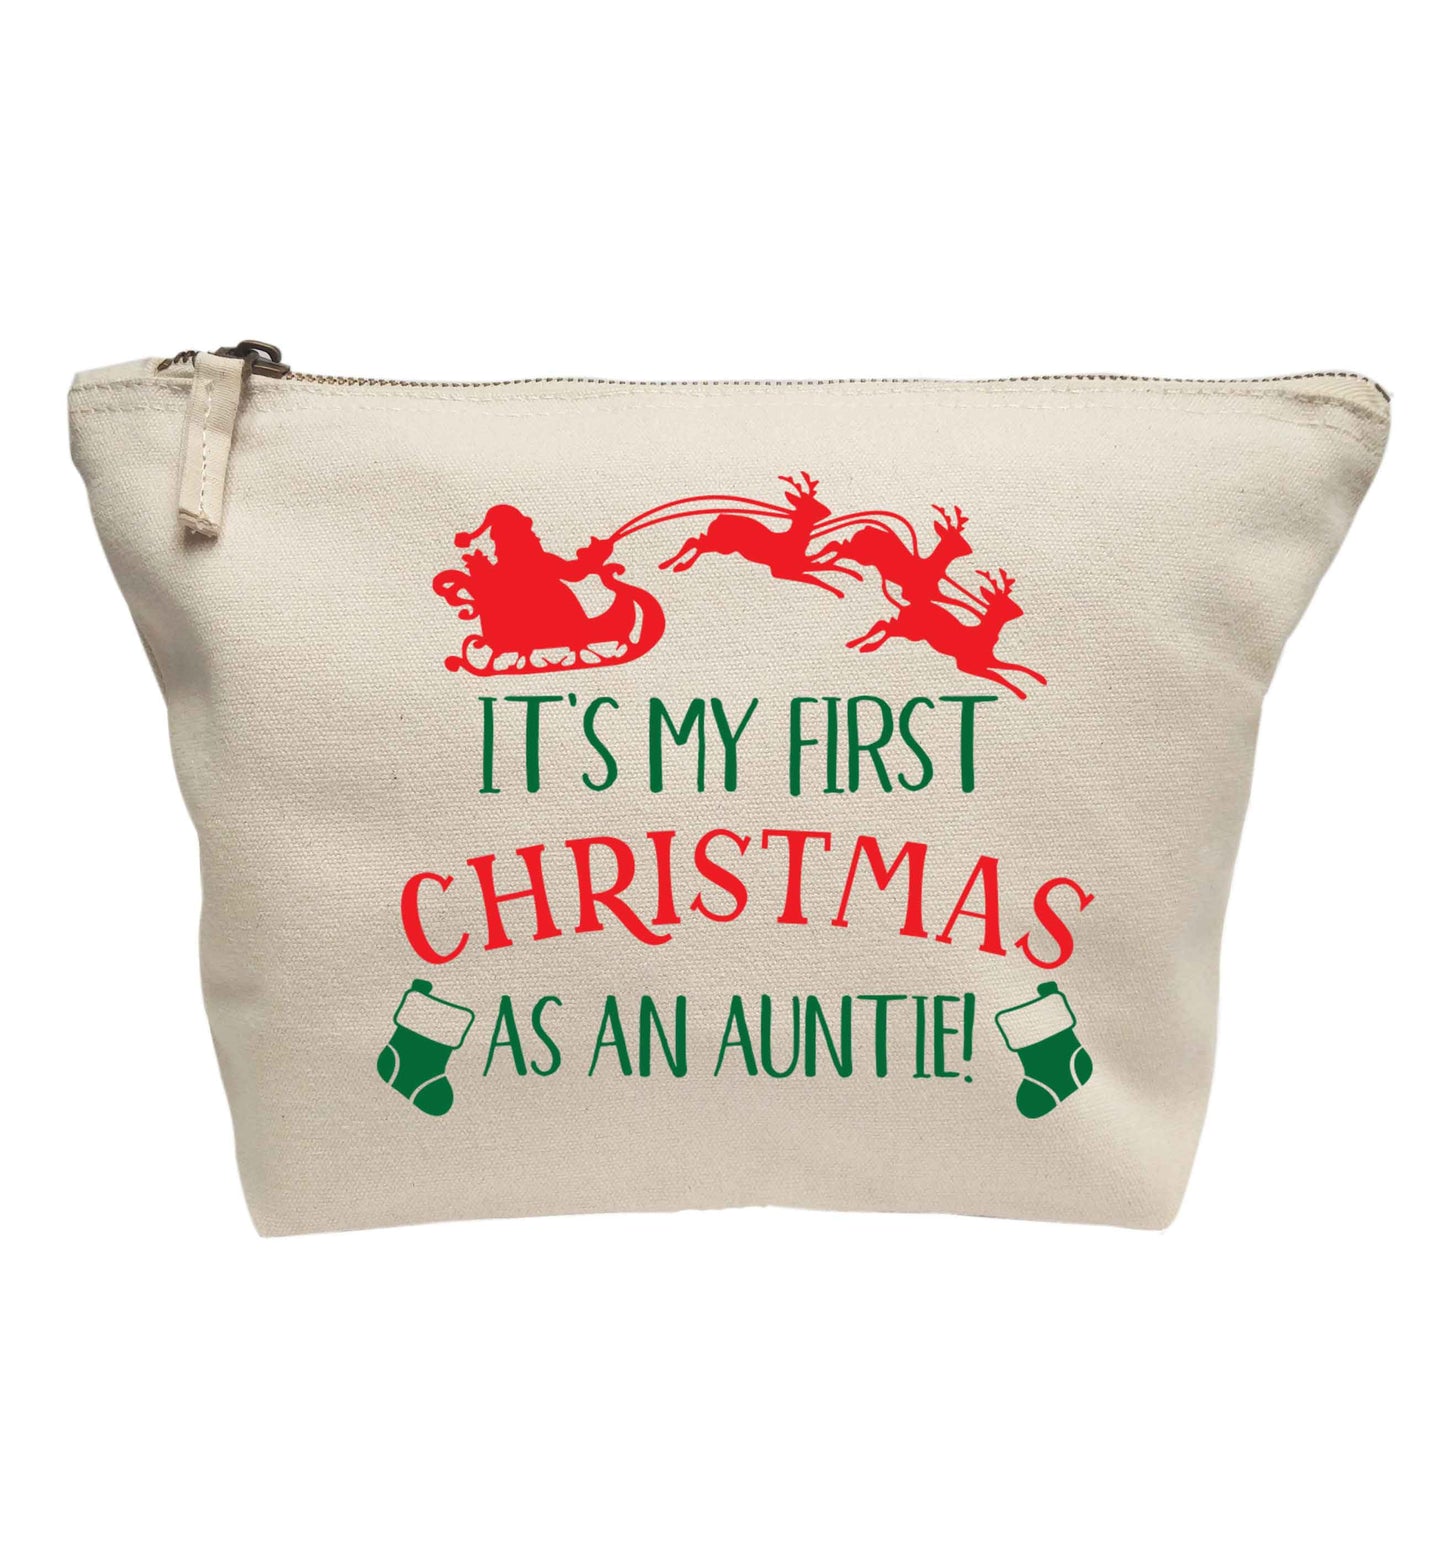 It's my first Christmas as an auntie! | makeup / wash bag